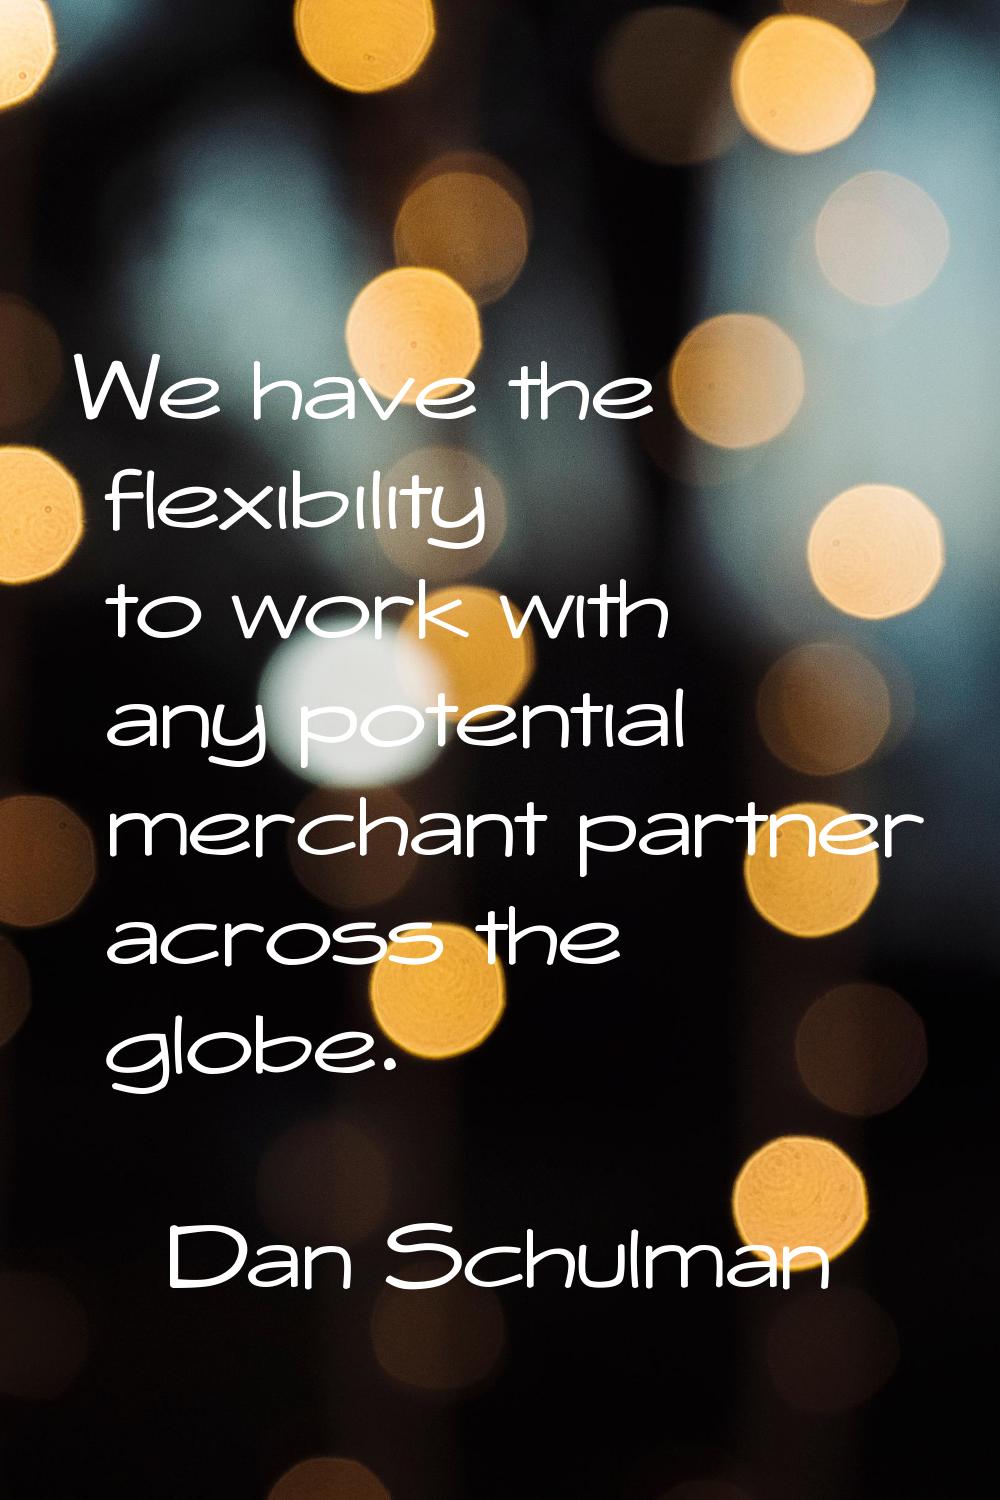 We have the flexibility to work with any potential merchant partner across the globe.